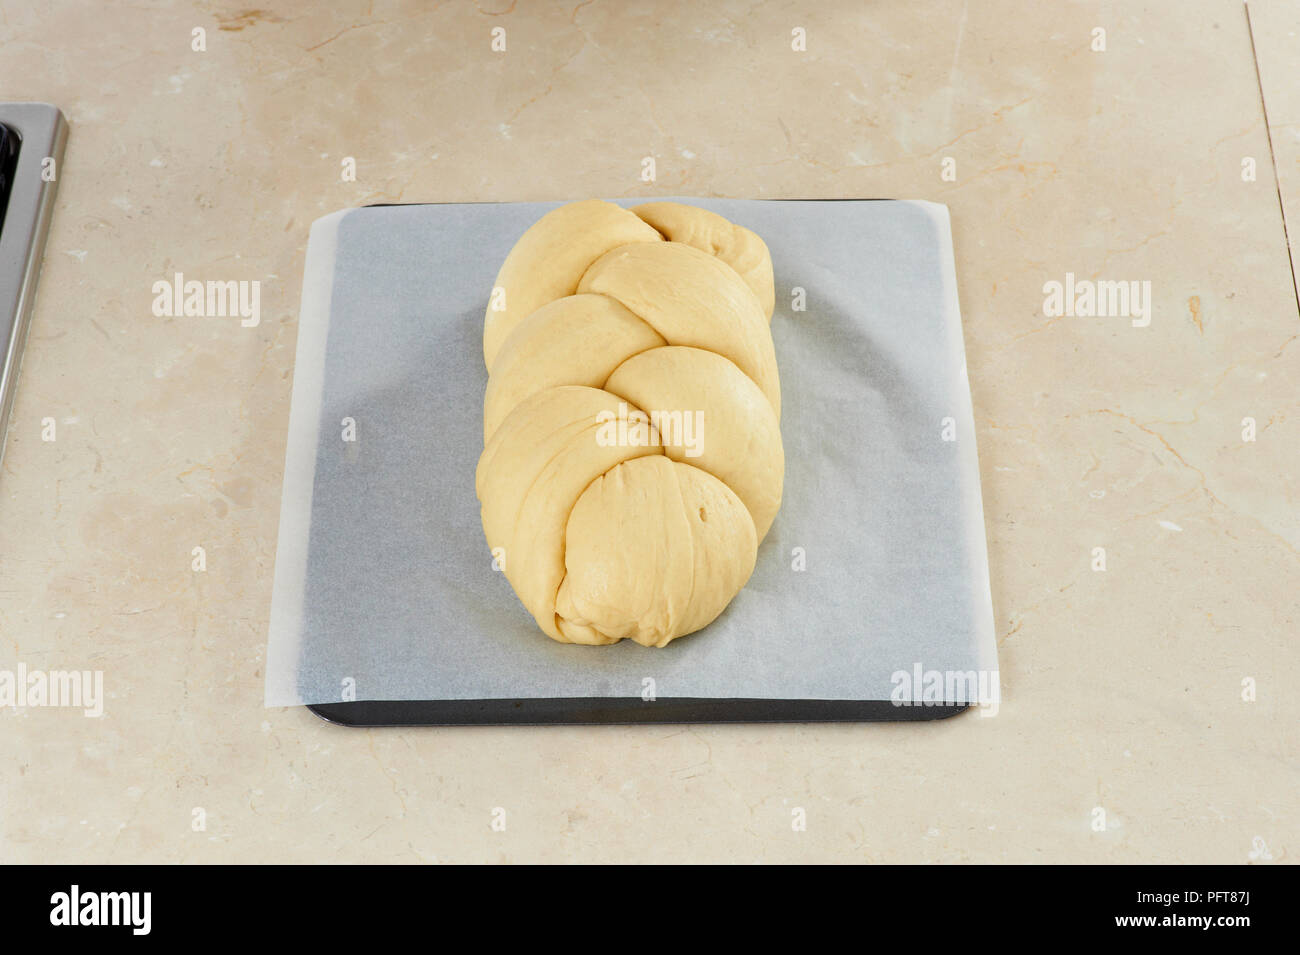 Raw braided Hefekranz loaf on baking tray covered with wax paper on kitchen worktop Stock Photo